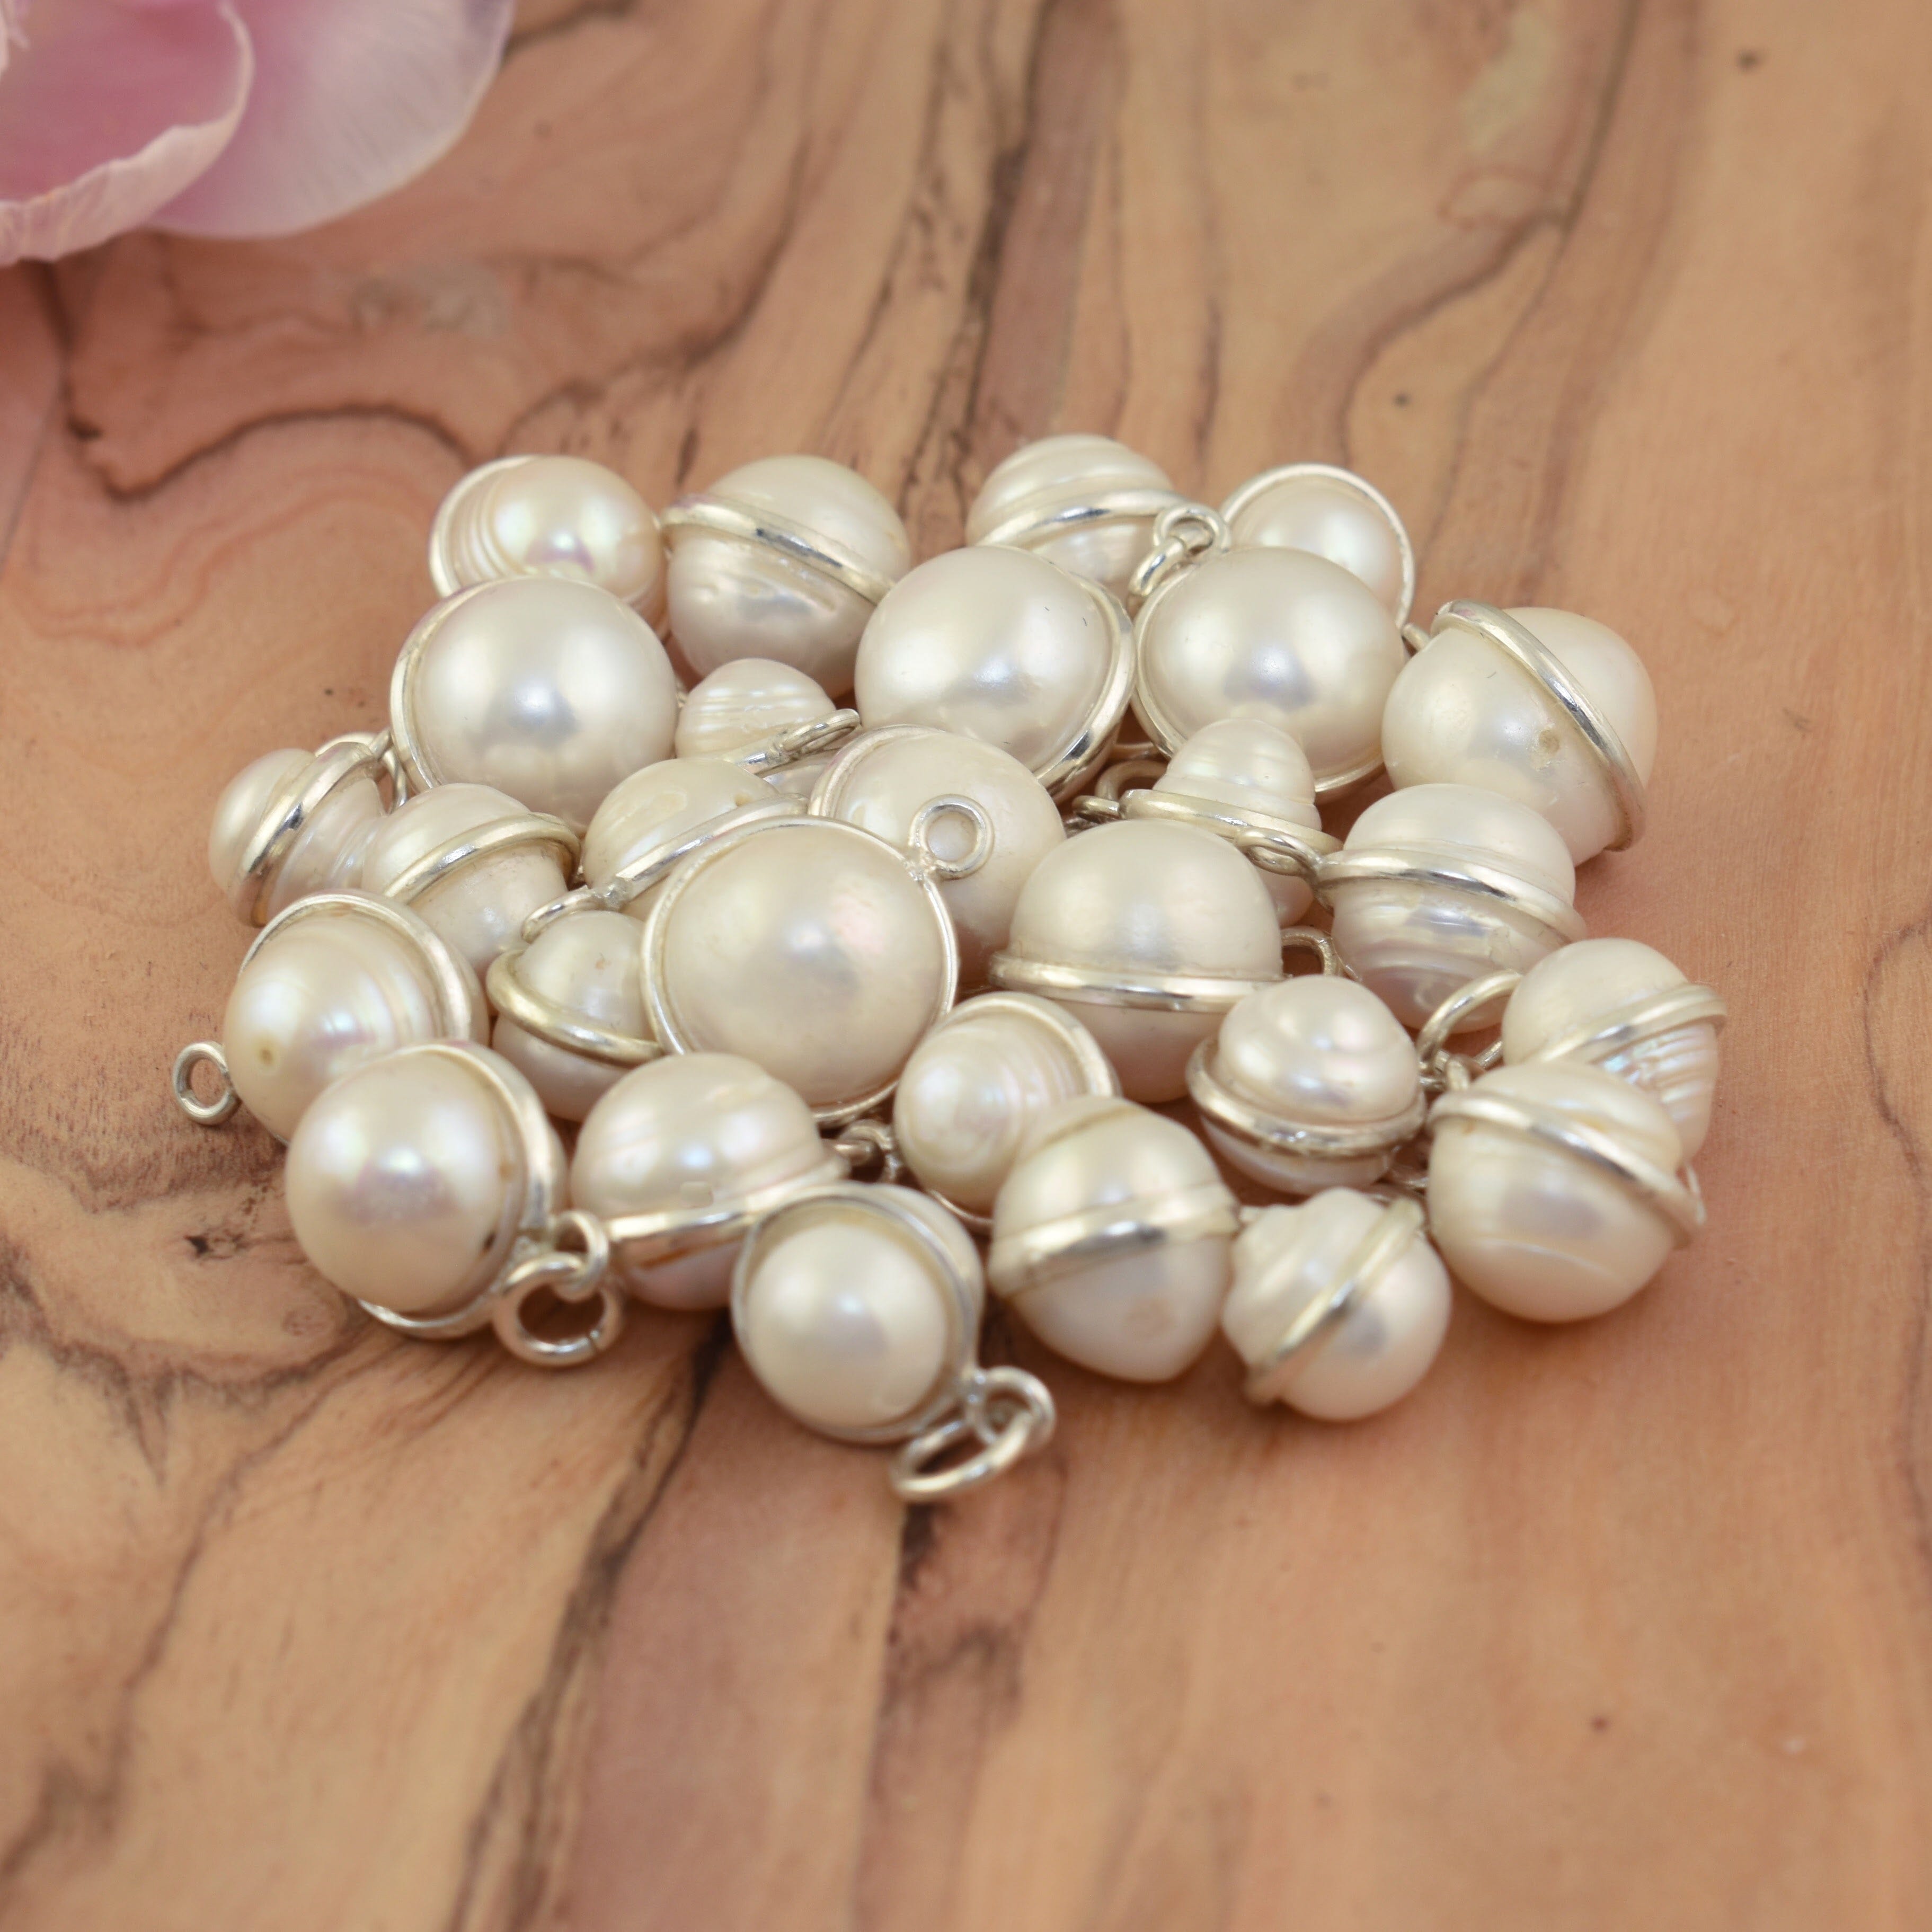 Slightly Imperfect - Spun Pearl Necklace